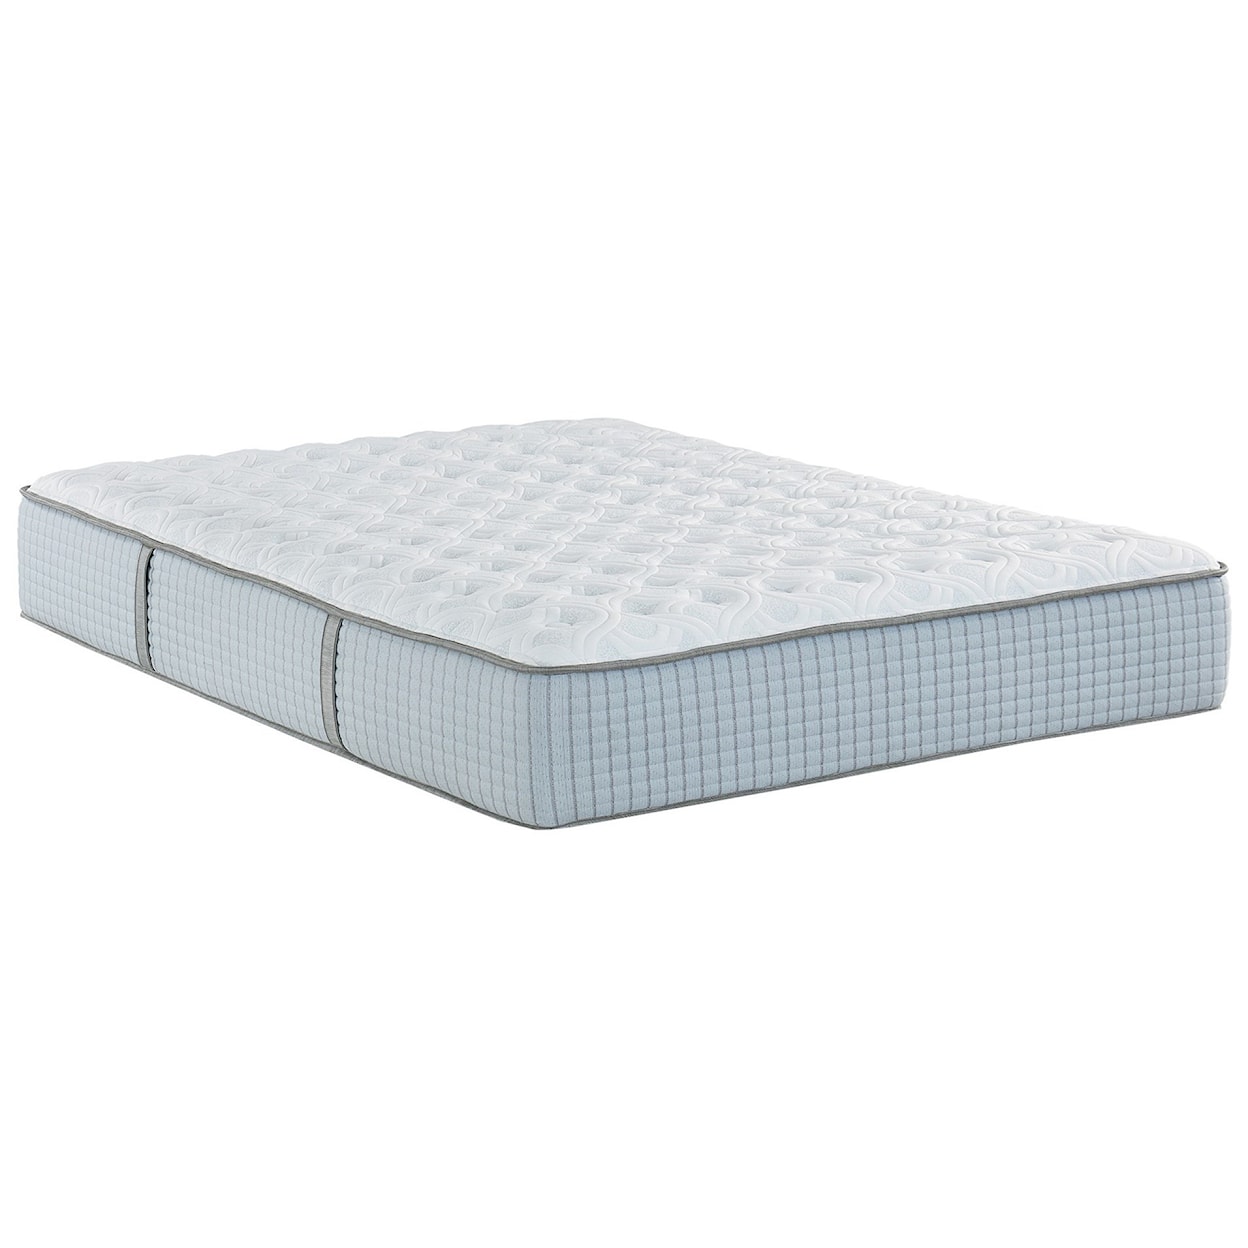 Restonic Clarion IV Luxury Plush and Luxury Firm Twin 2-Sided Firm / Plush Mattress